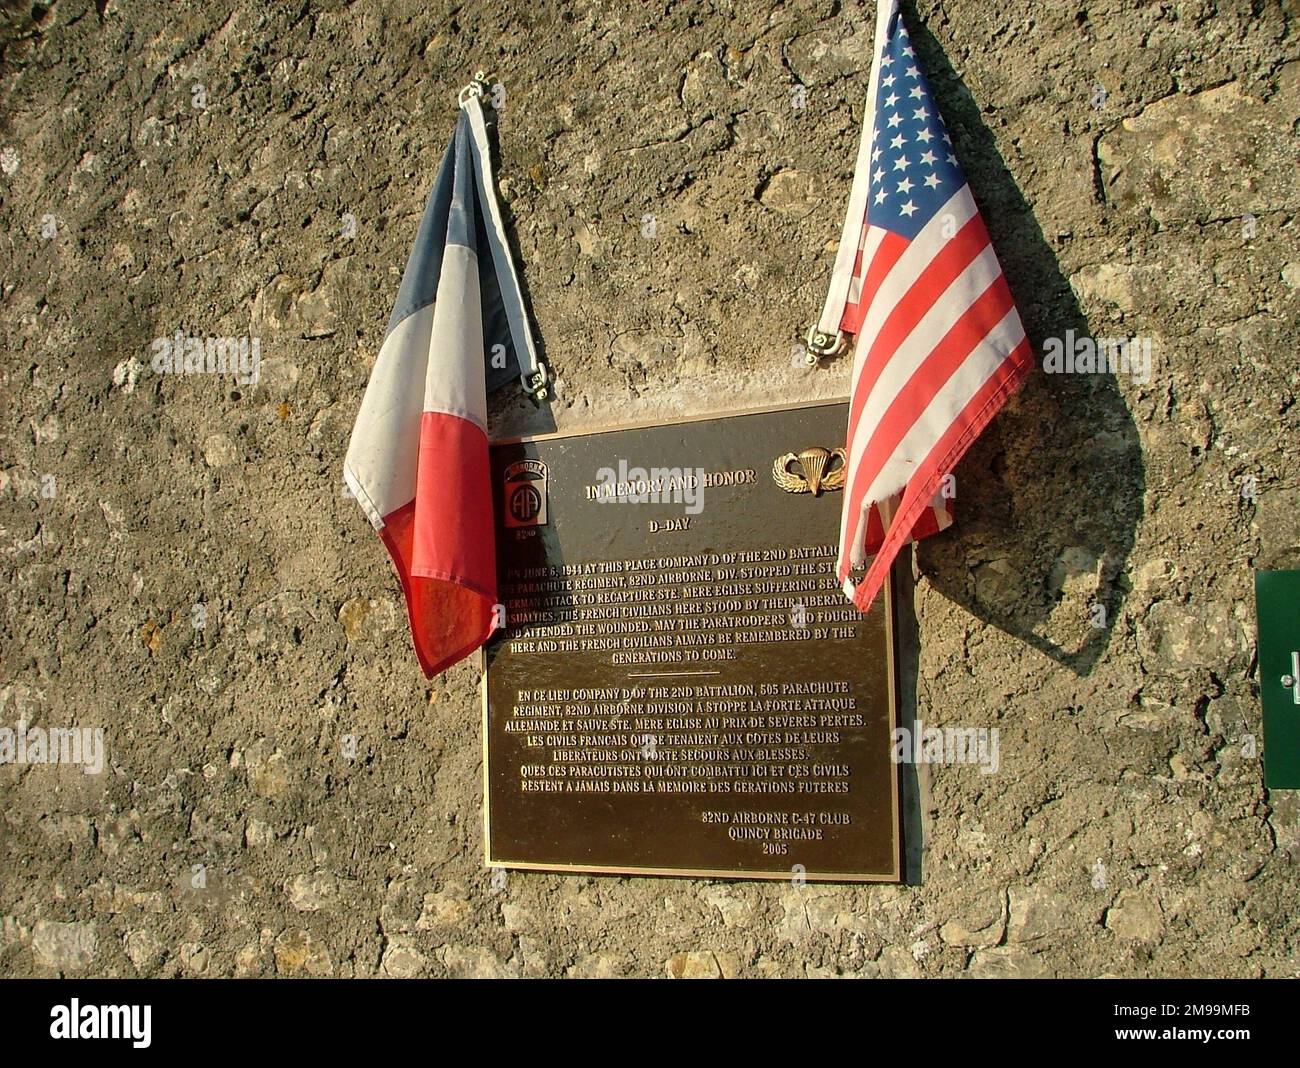 The plaque was erected by the 82nd Airborne C47 Club and commemorates the action of 'Company D' of the 2nd Battalion 505 Parachute Infantry Regiment, 82nd Airborne Division, in foiling a German attack on Ste Mere Eglise. It also acknowledges the help of the French in tending the wounded. After Normandy the 505th shoulder insignia carried the text 'H-MINUS' at the bottom because the Battalion jumped earlier than it should have done. Stock Photo